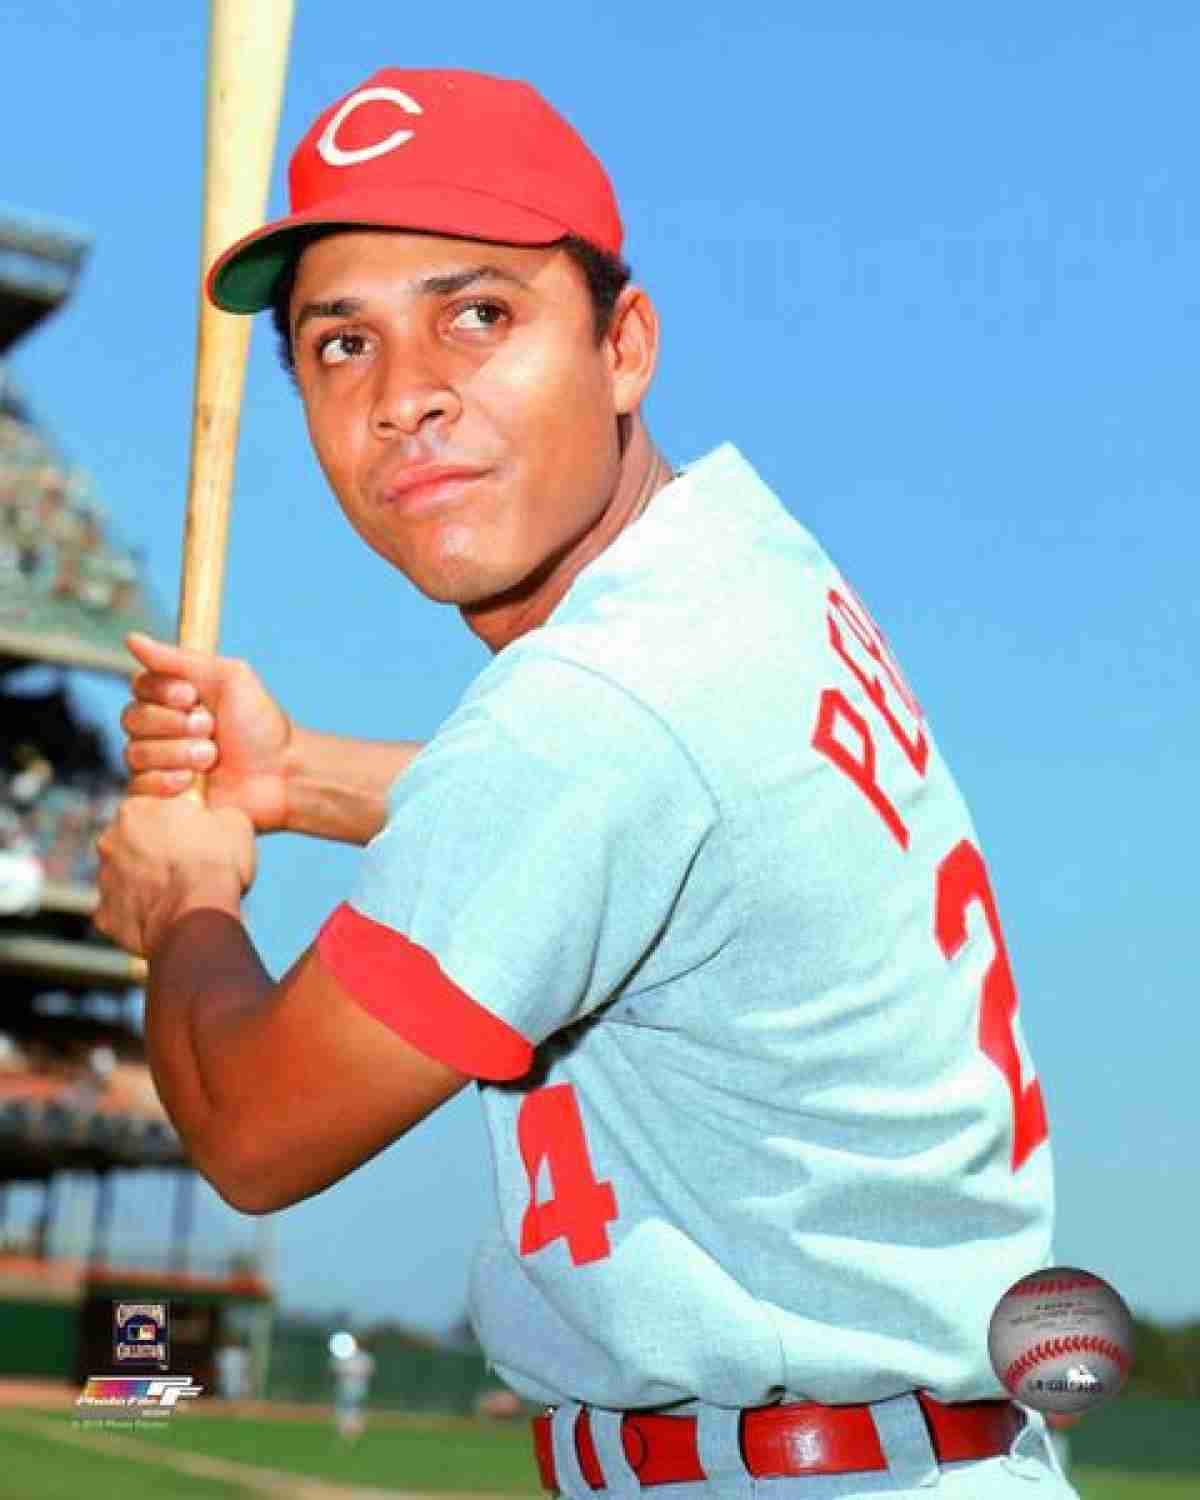 Not in Hall of Fame - 11. Tony Perez